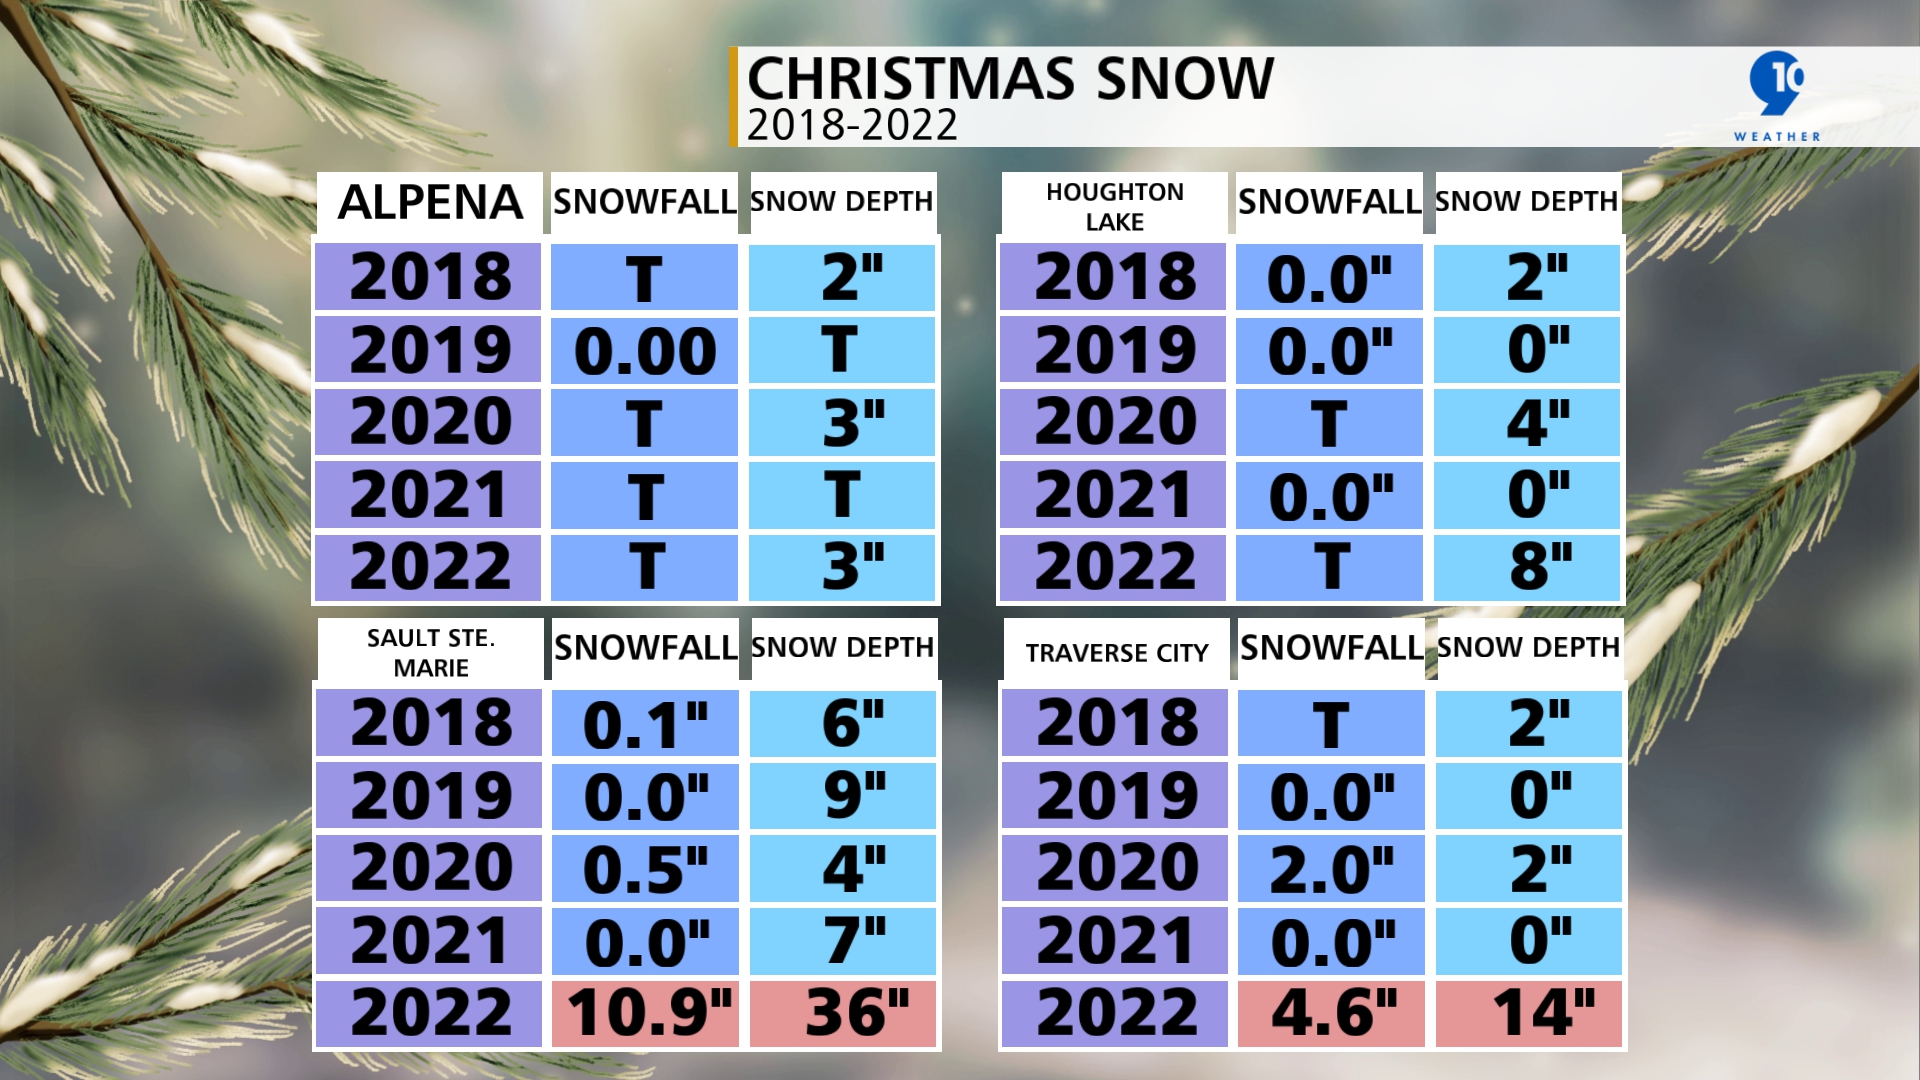 Snow Fall and Snow Depth on December 25th 2018-2022